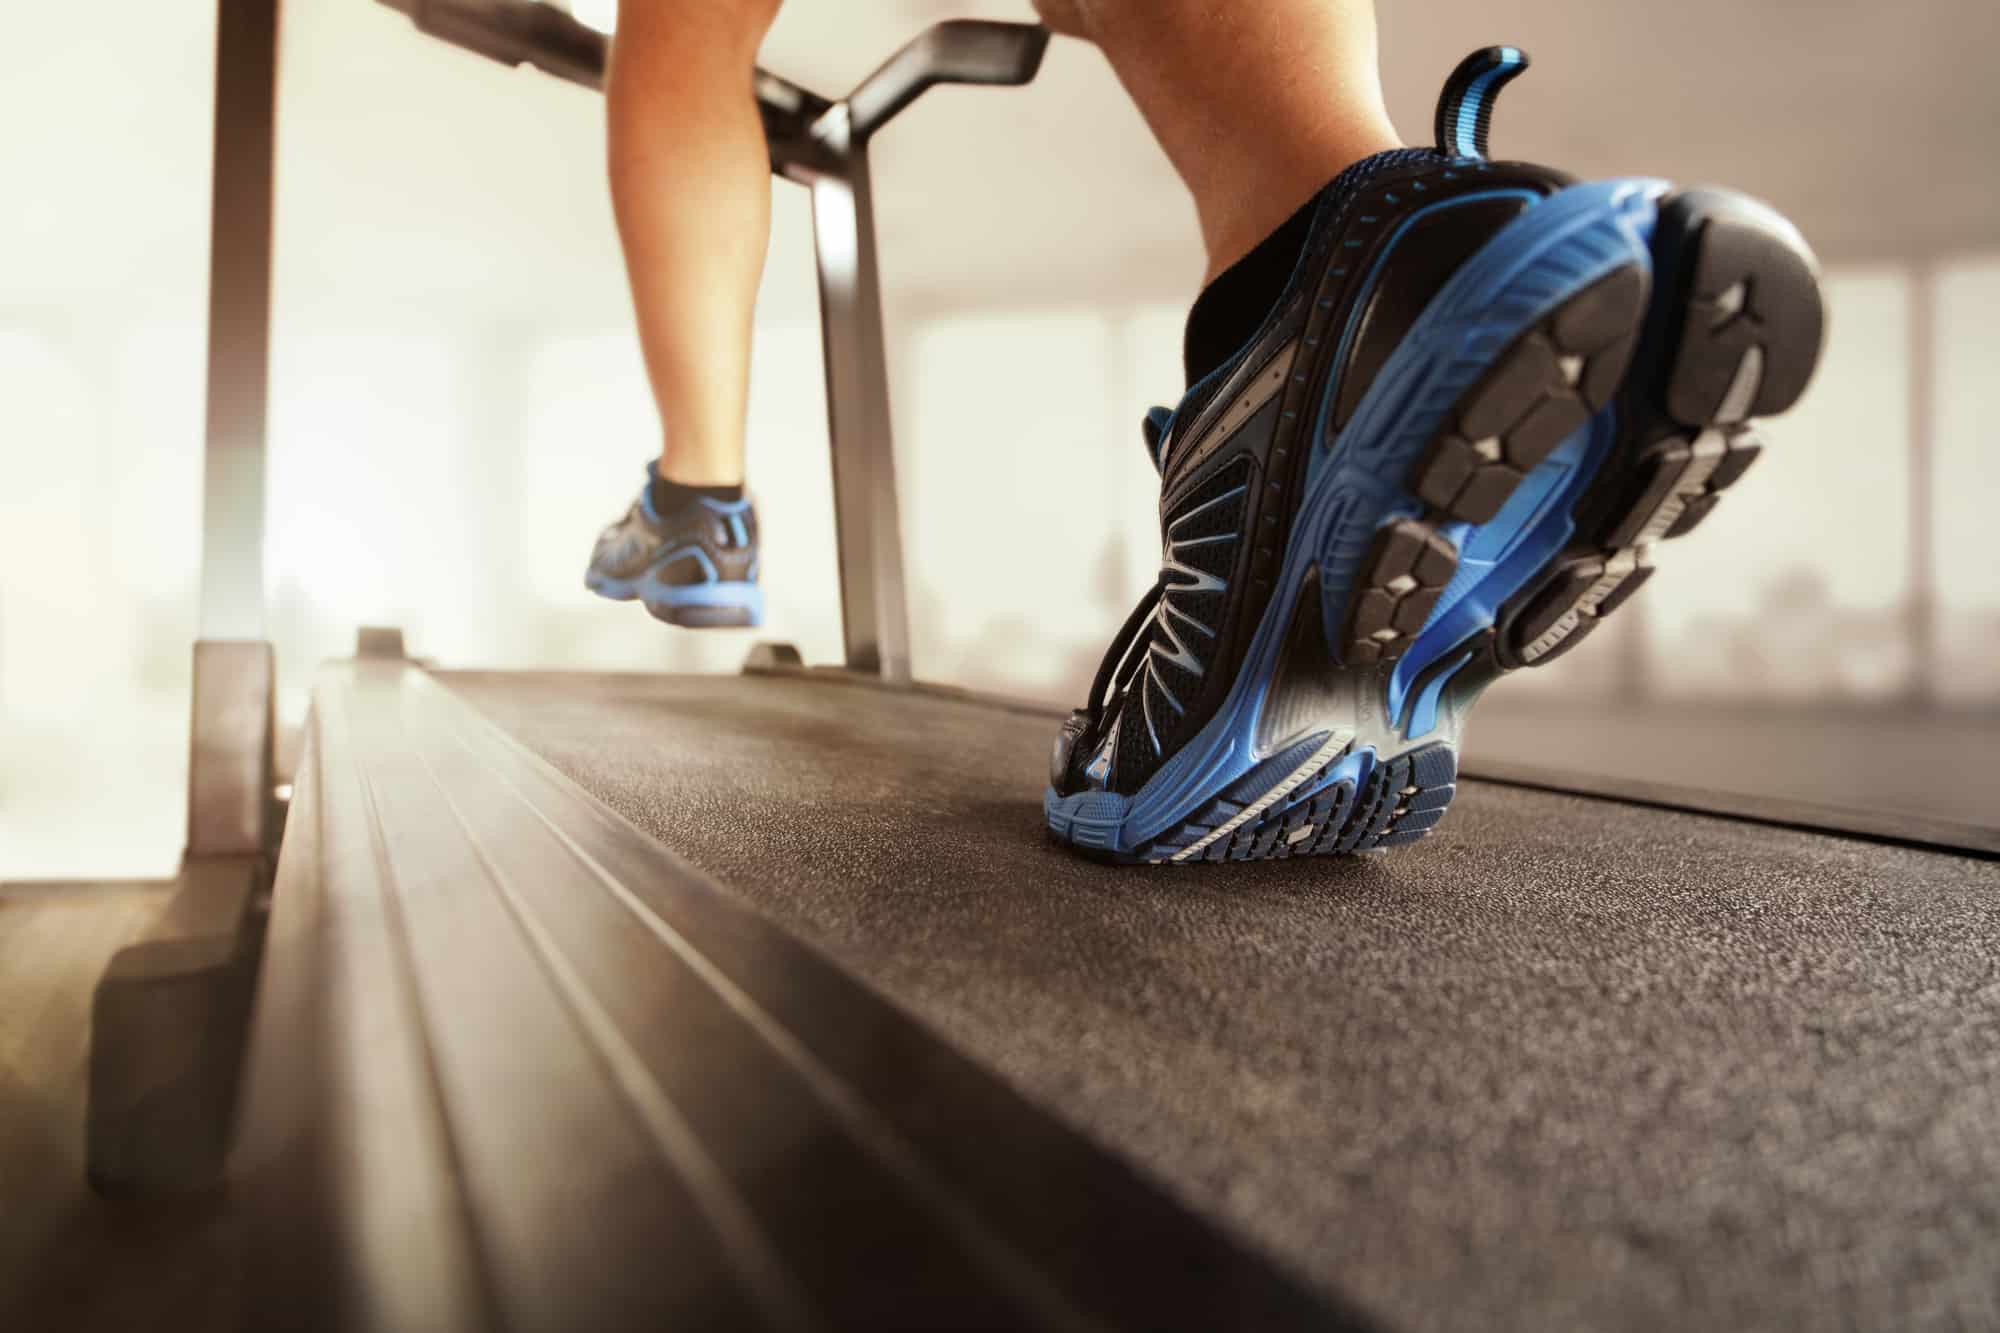 shoes for running on treadmill